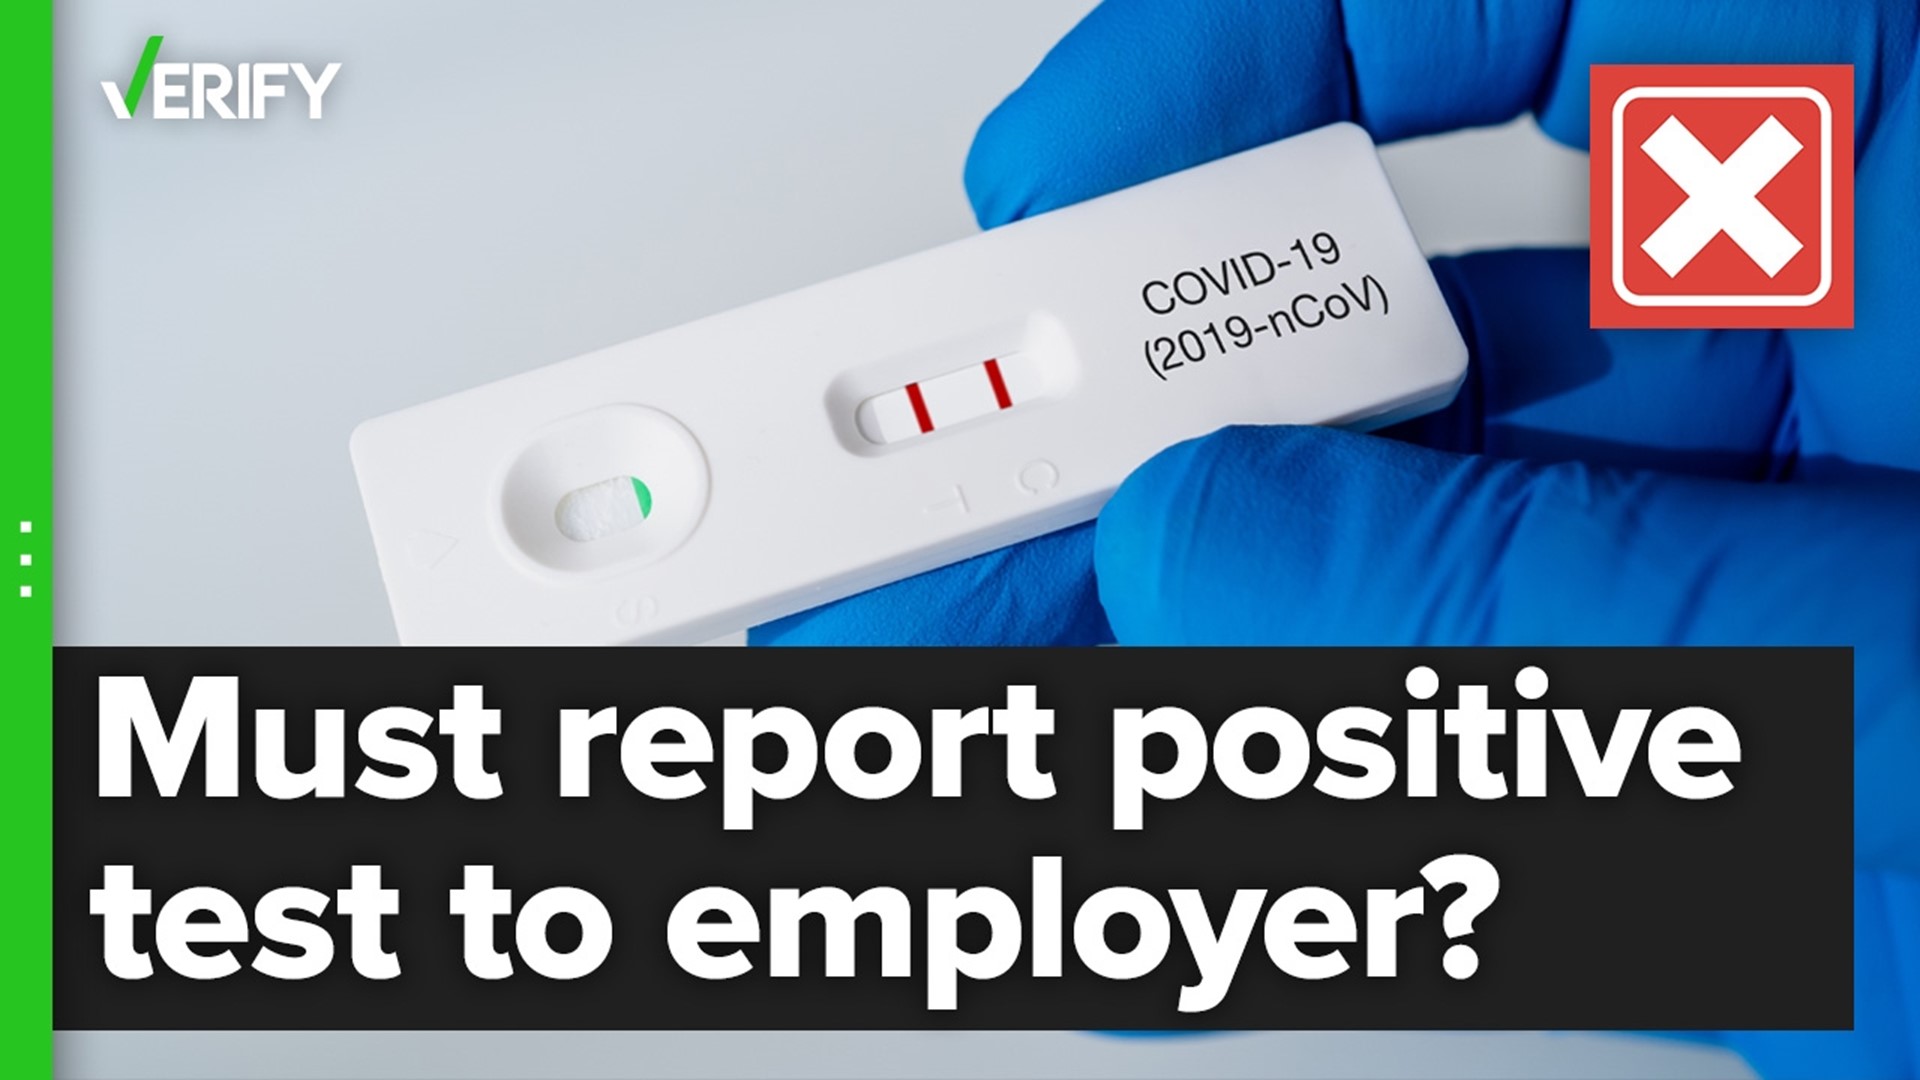 Employers can ask employees to report positive COVID-19 test results, but workers aren’t required to do so by law.